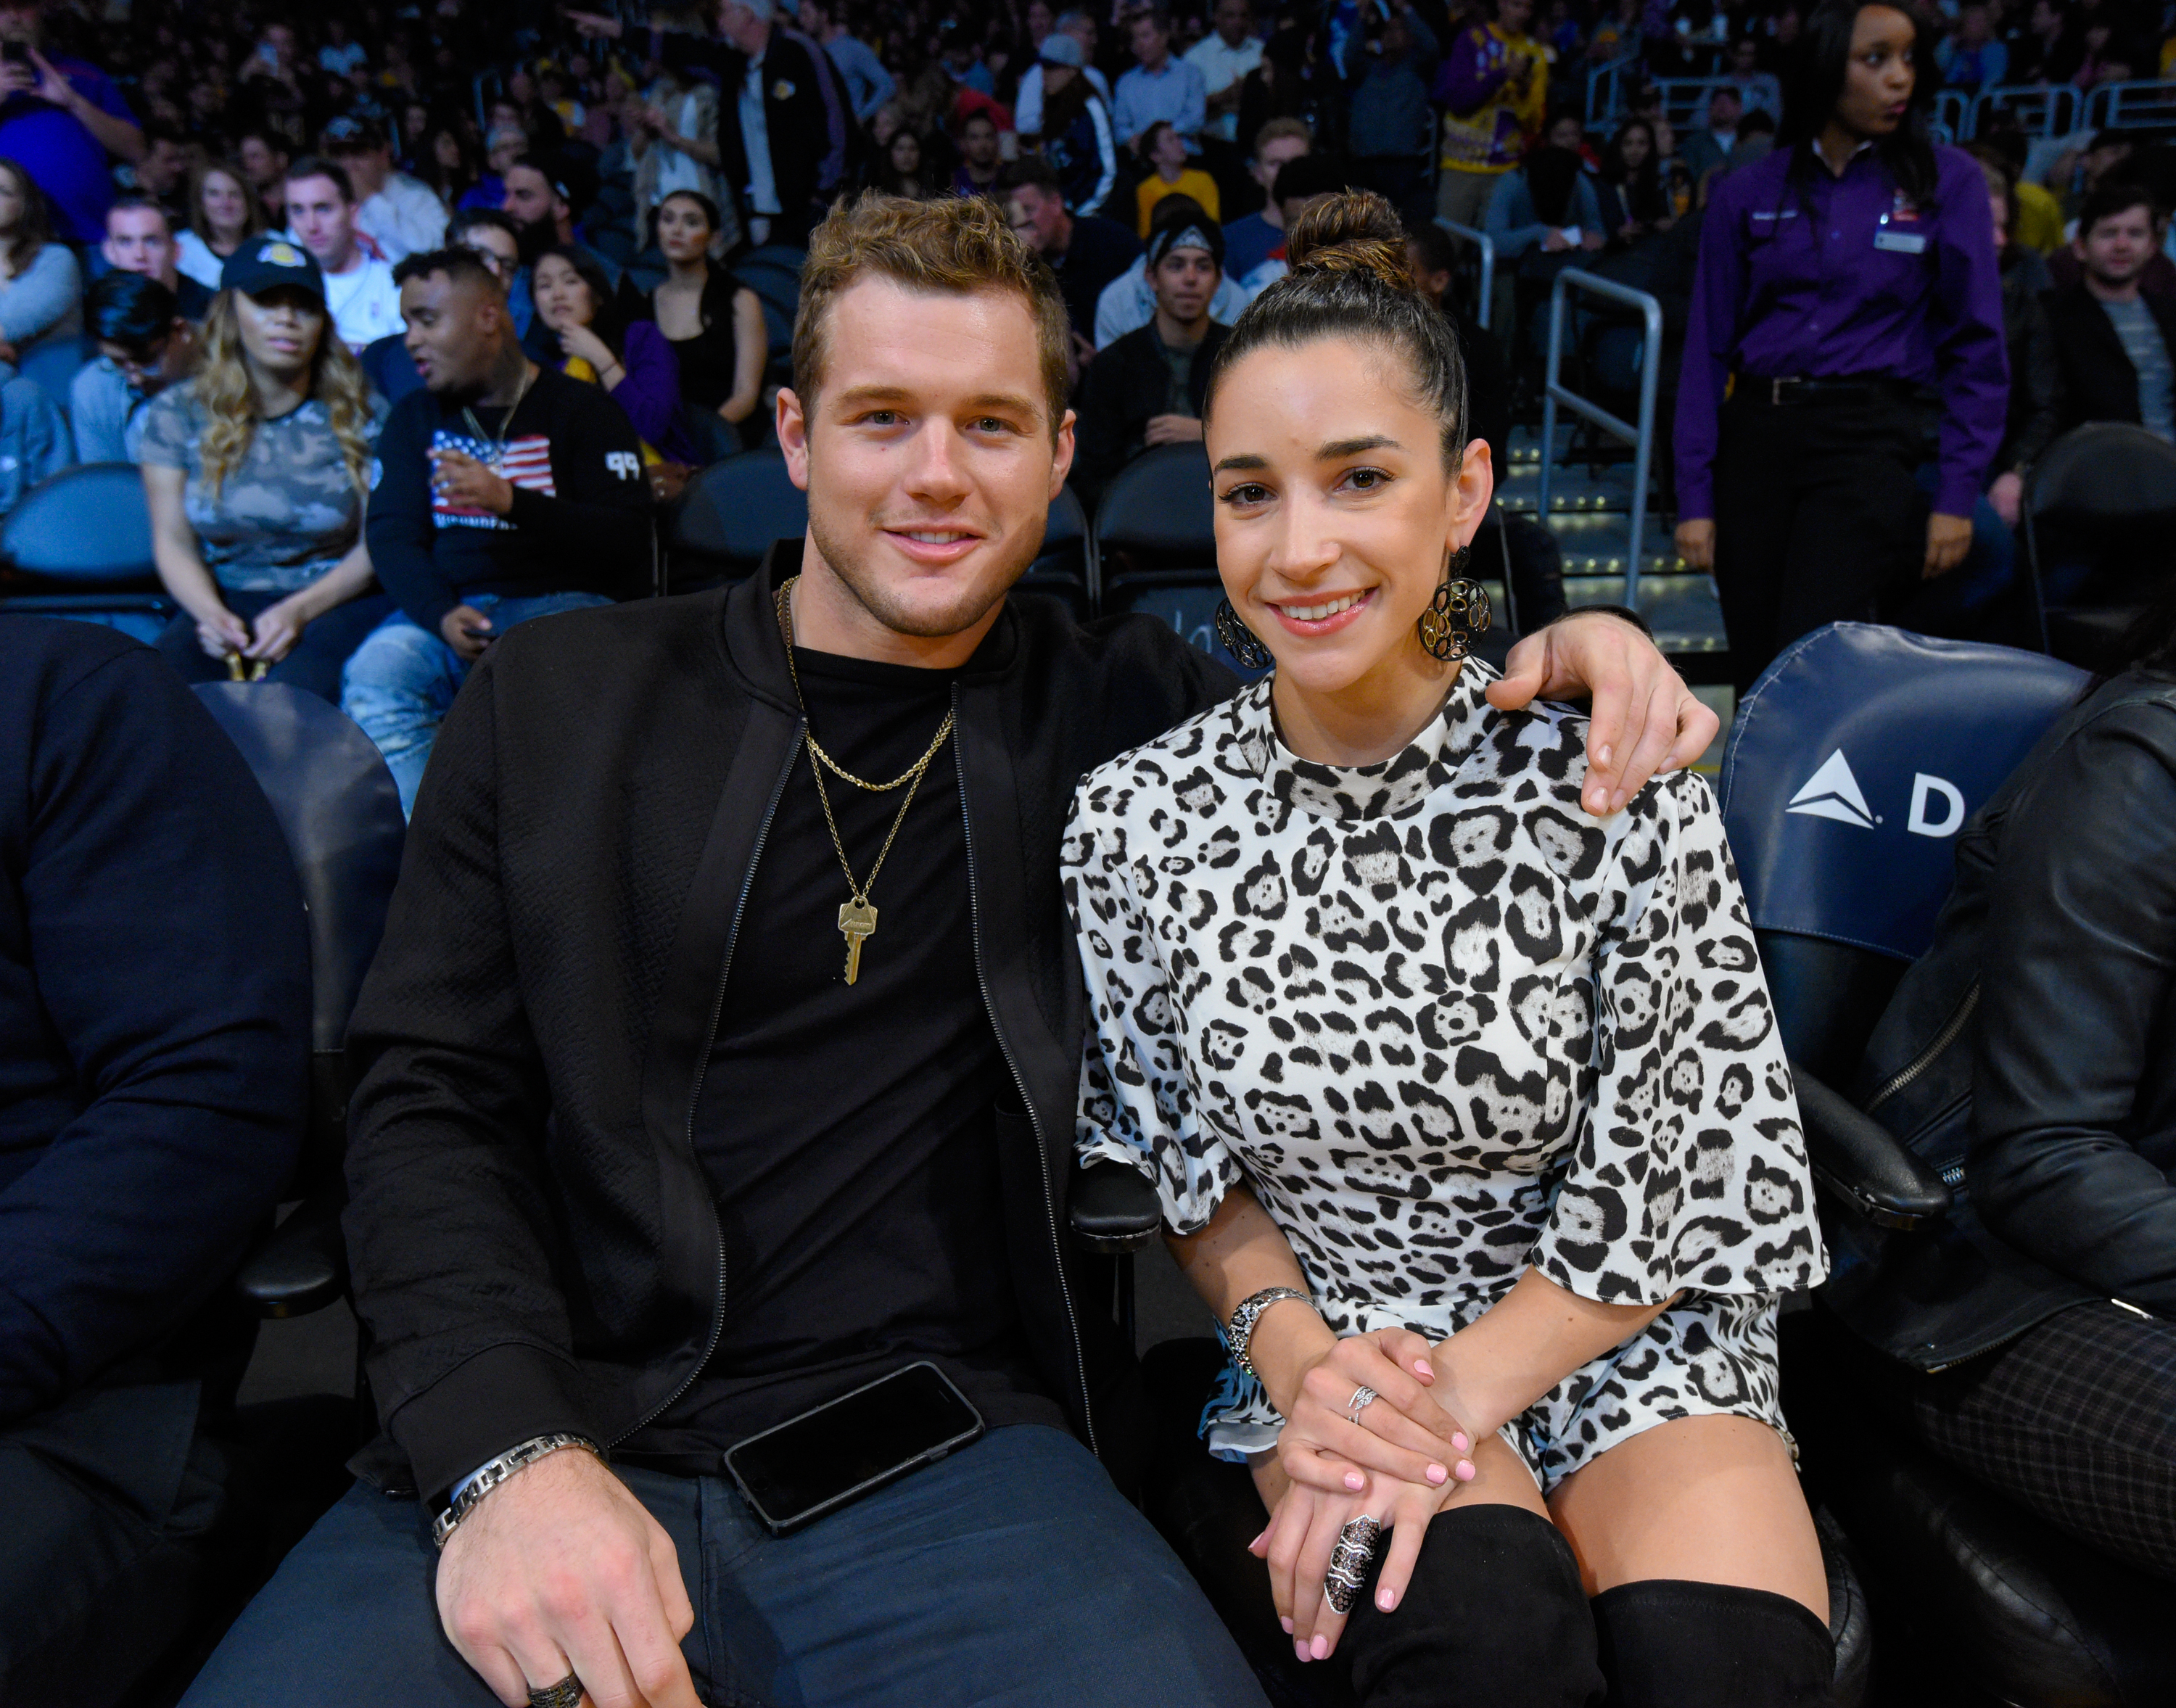 Colton Underwood and Aly Raisman attend a basketball game between the Portland Trail Blazers and the Los Angeles Lakers at Staples Center, on January 10, 2017, in Los Angeles, California. | Source: Getty Images